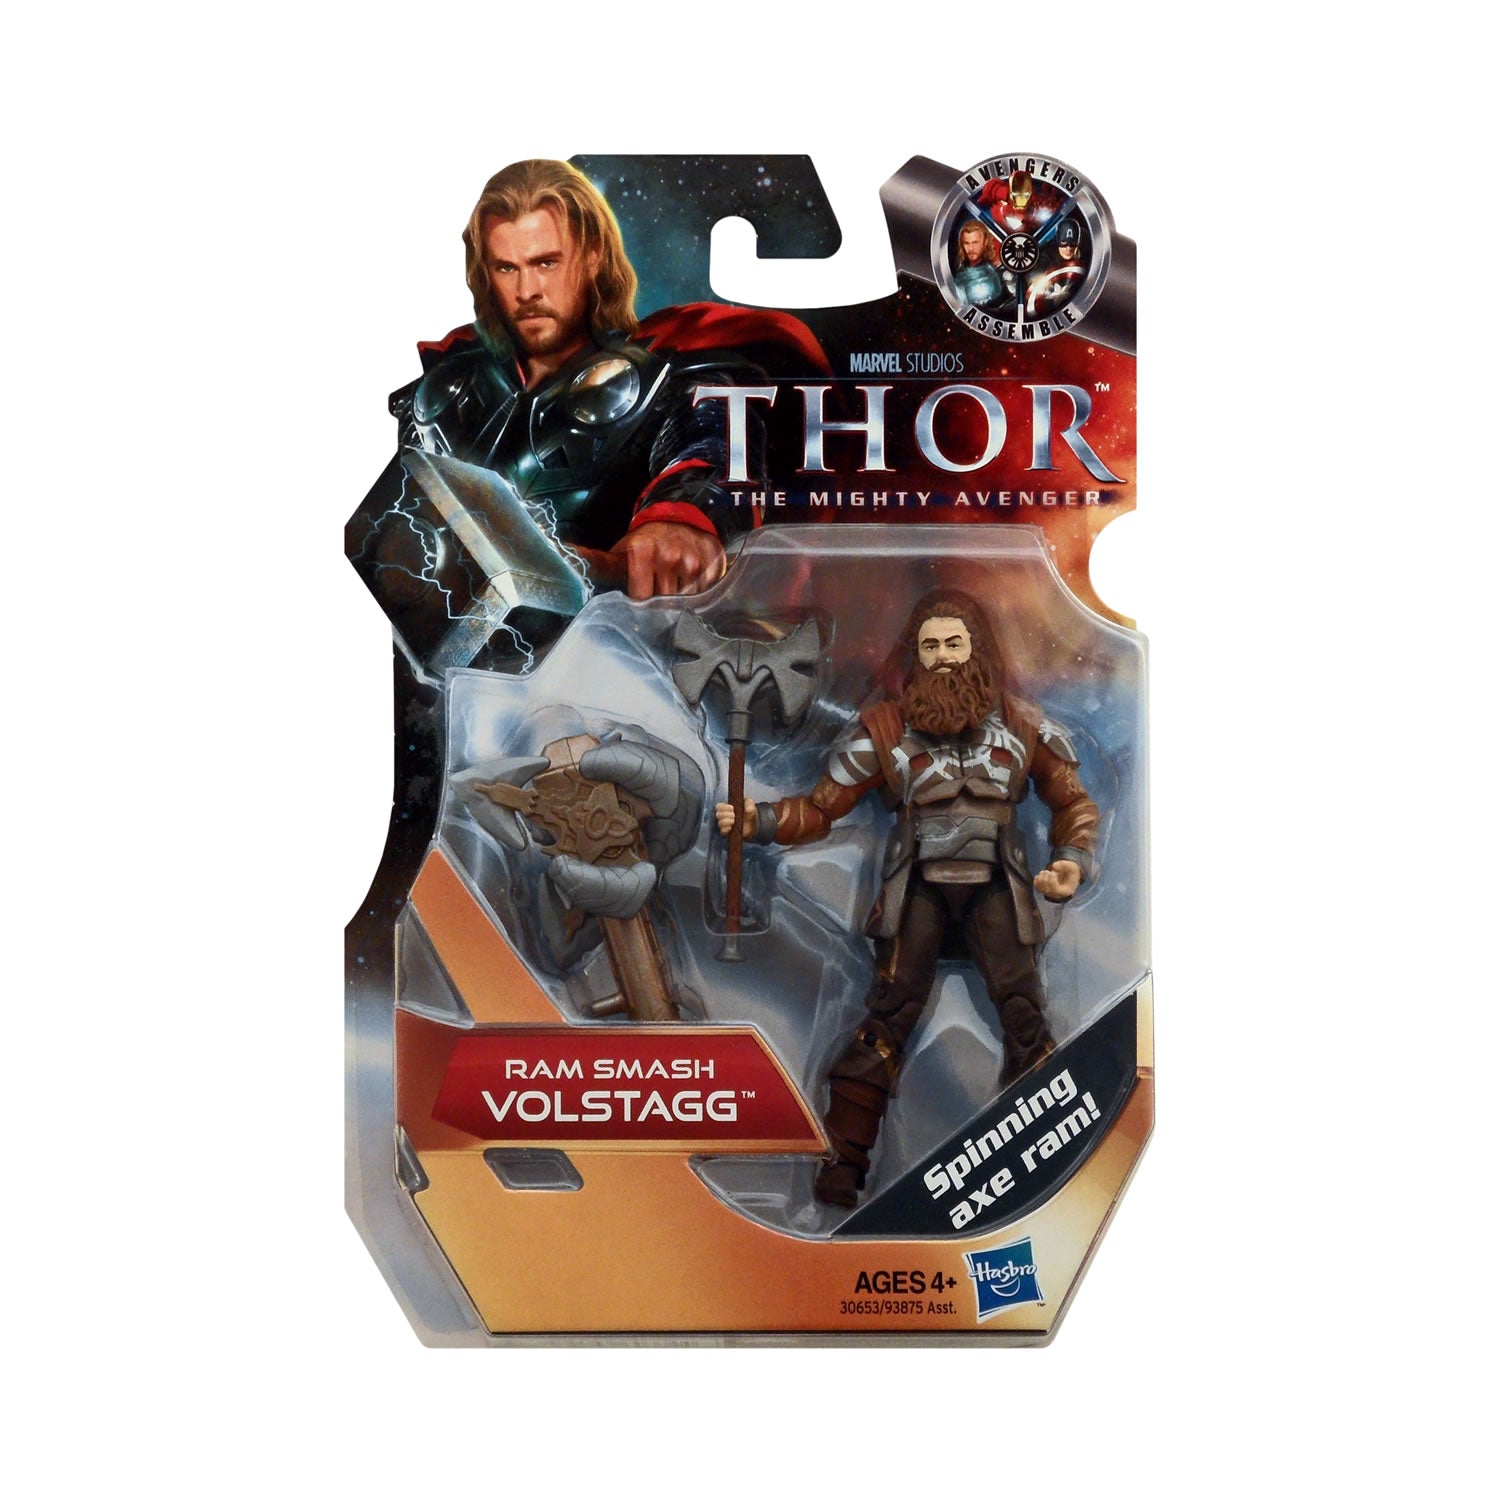 Ram Smash Volstagg from Thor: The Mighty Avenger – Action Figures and  Collectible Toys